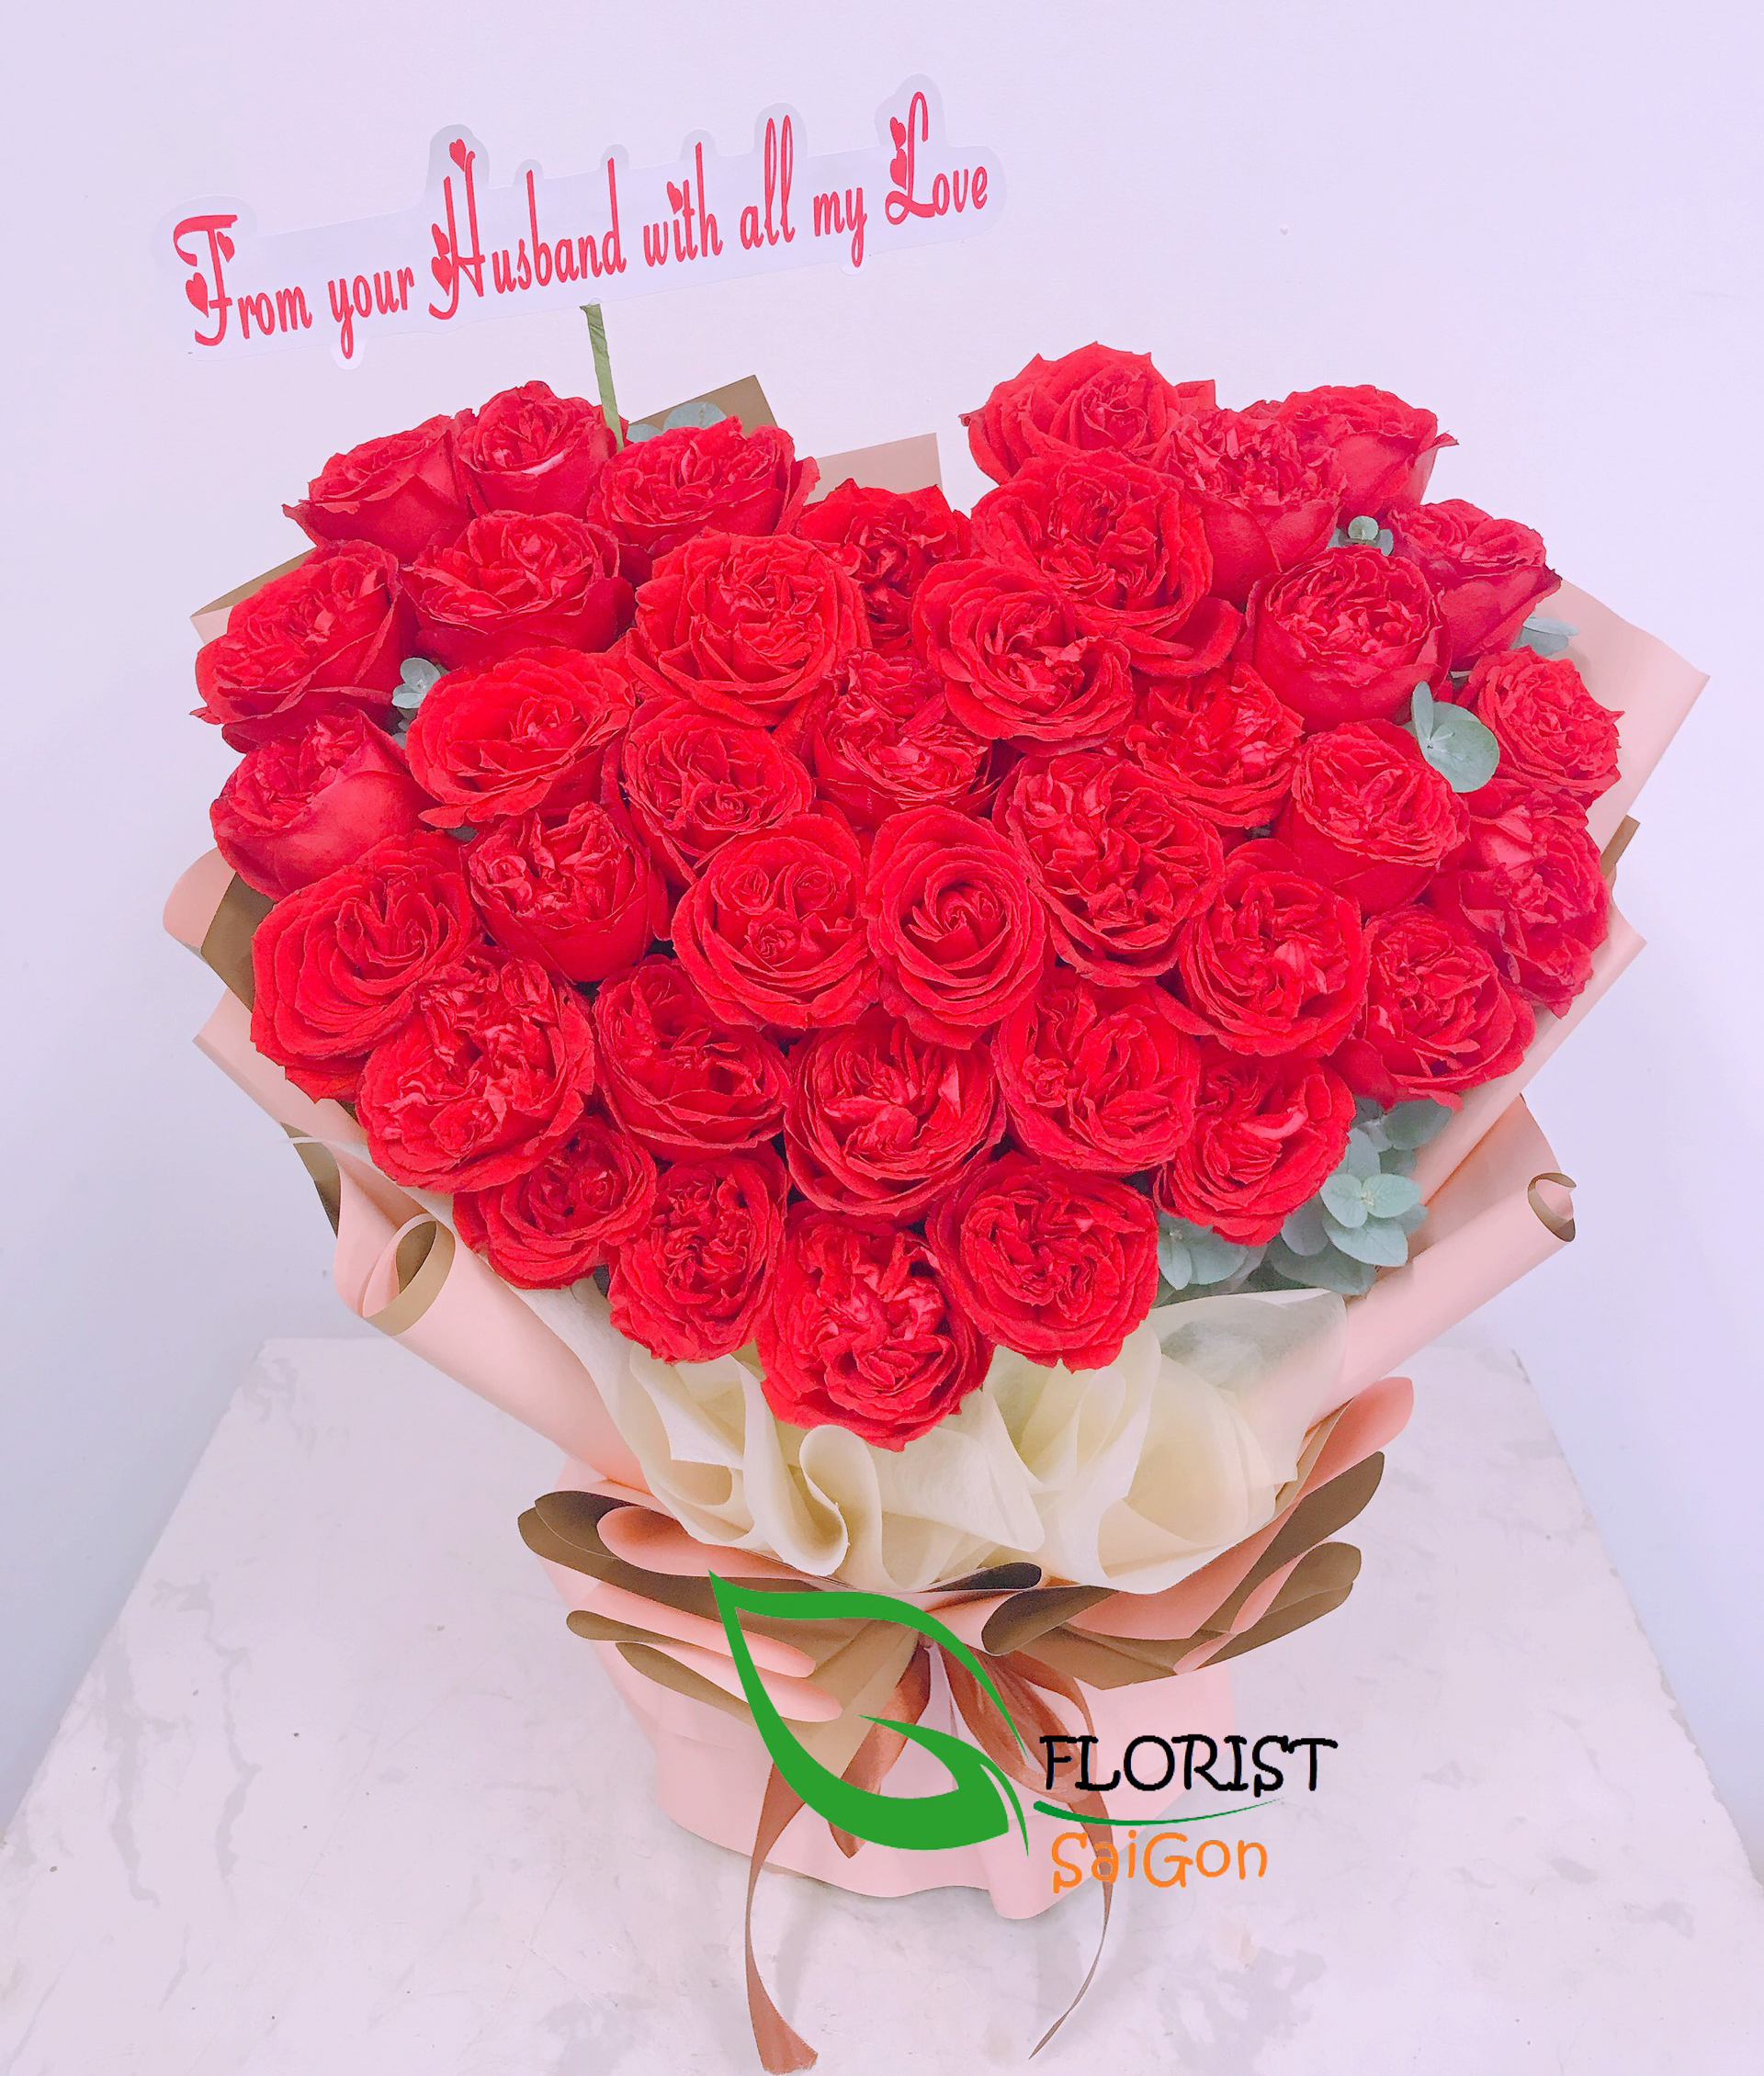 Happy Valentines day flowers with same day delivery Saigon